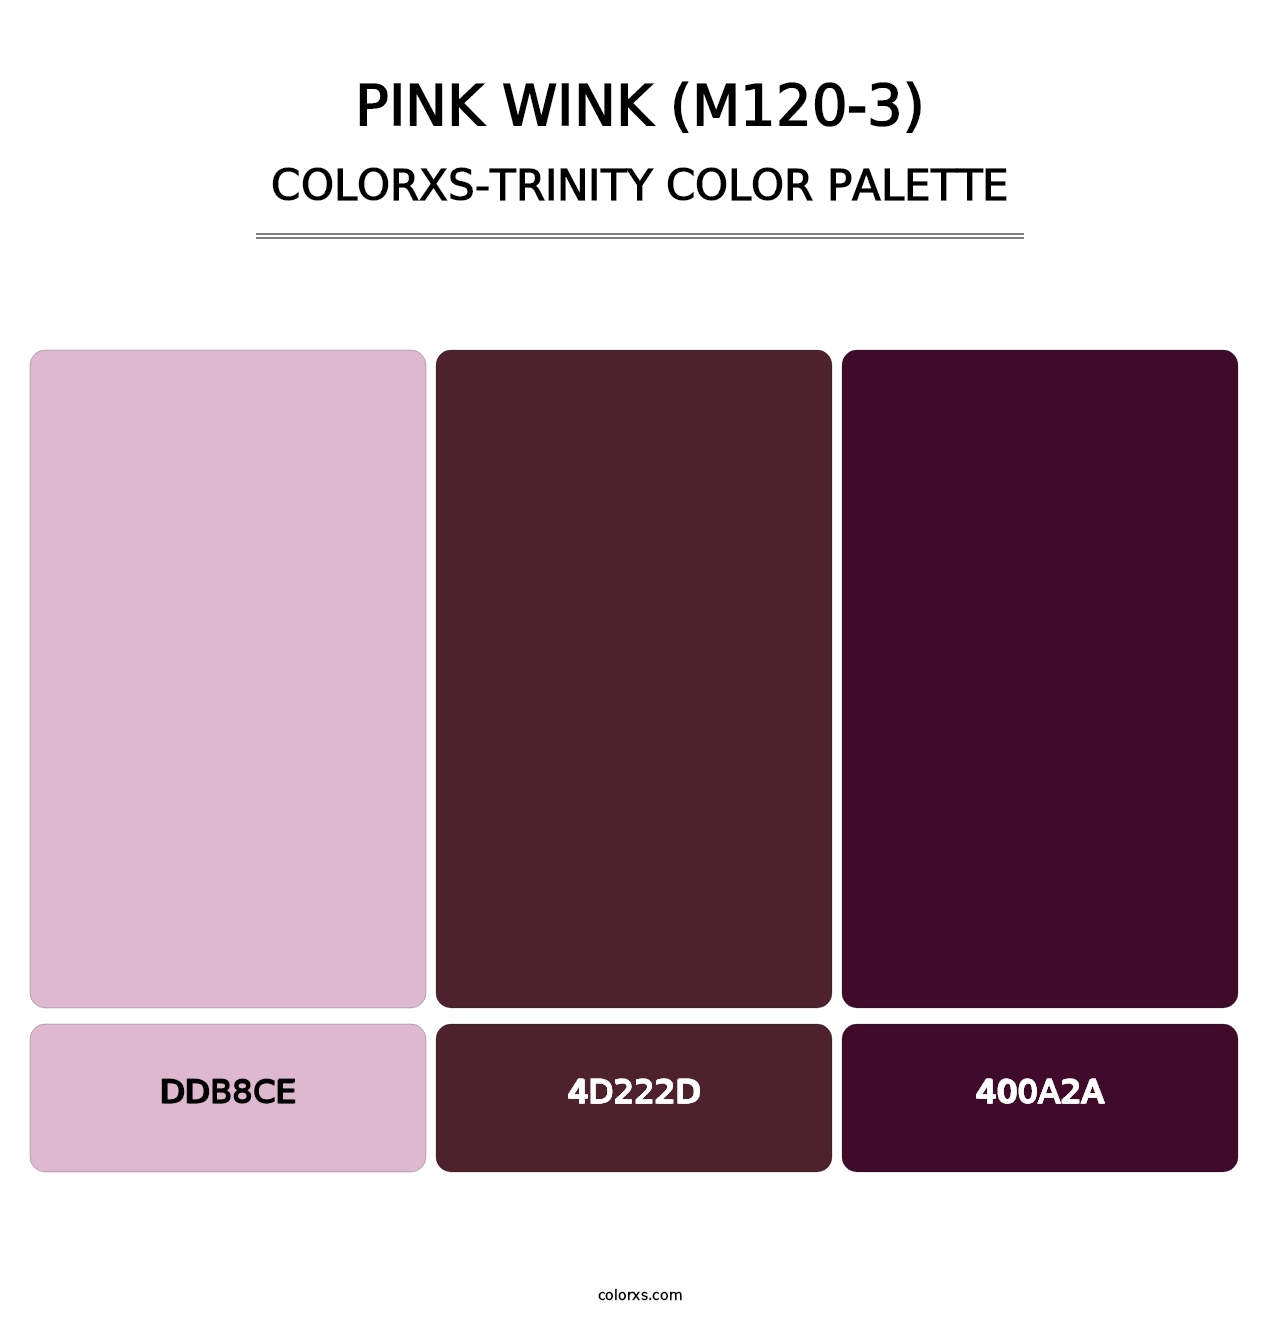 Pink Wink (M120-3) - Colorxs Trinity Palette